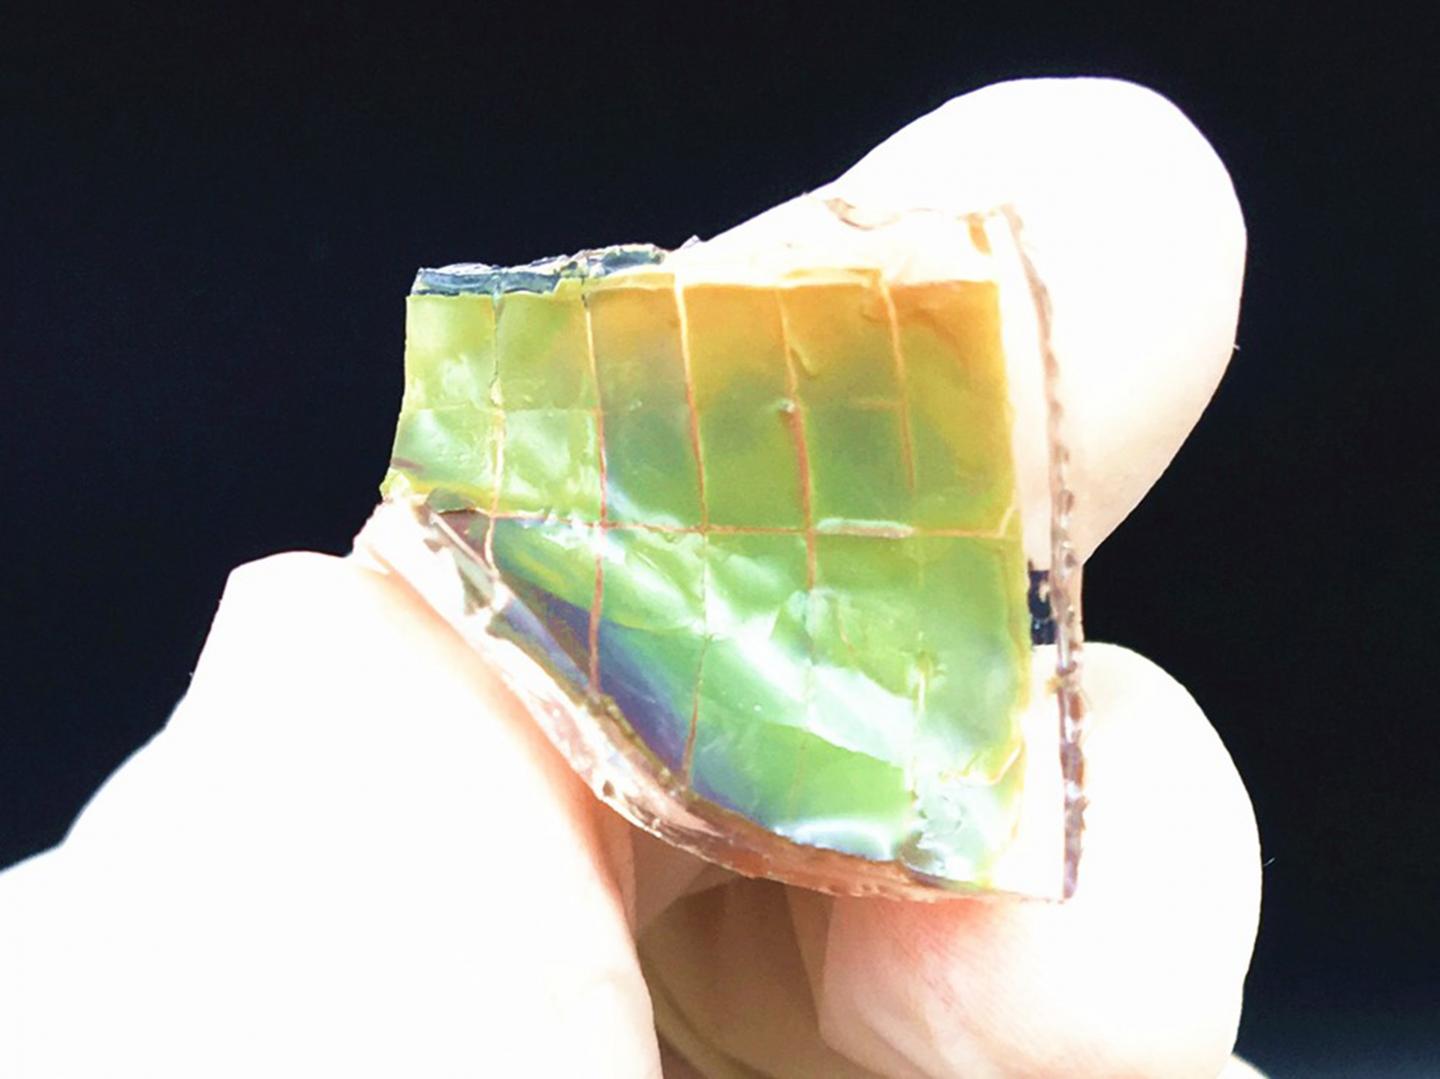 A Chameleon-Inspired Smart Skin Changes Color in the Sun